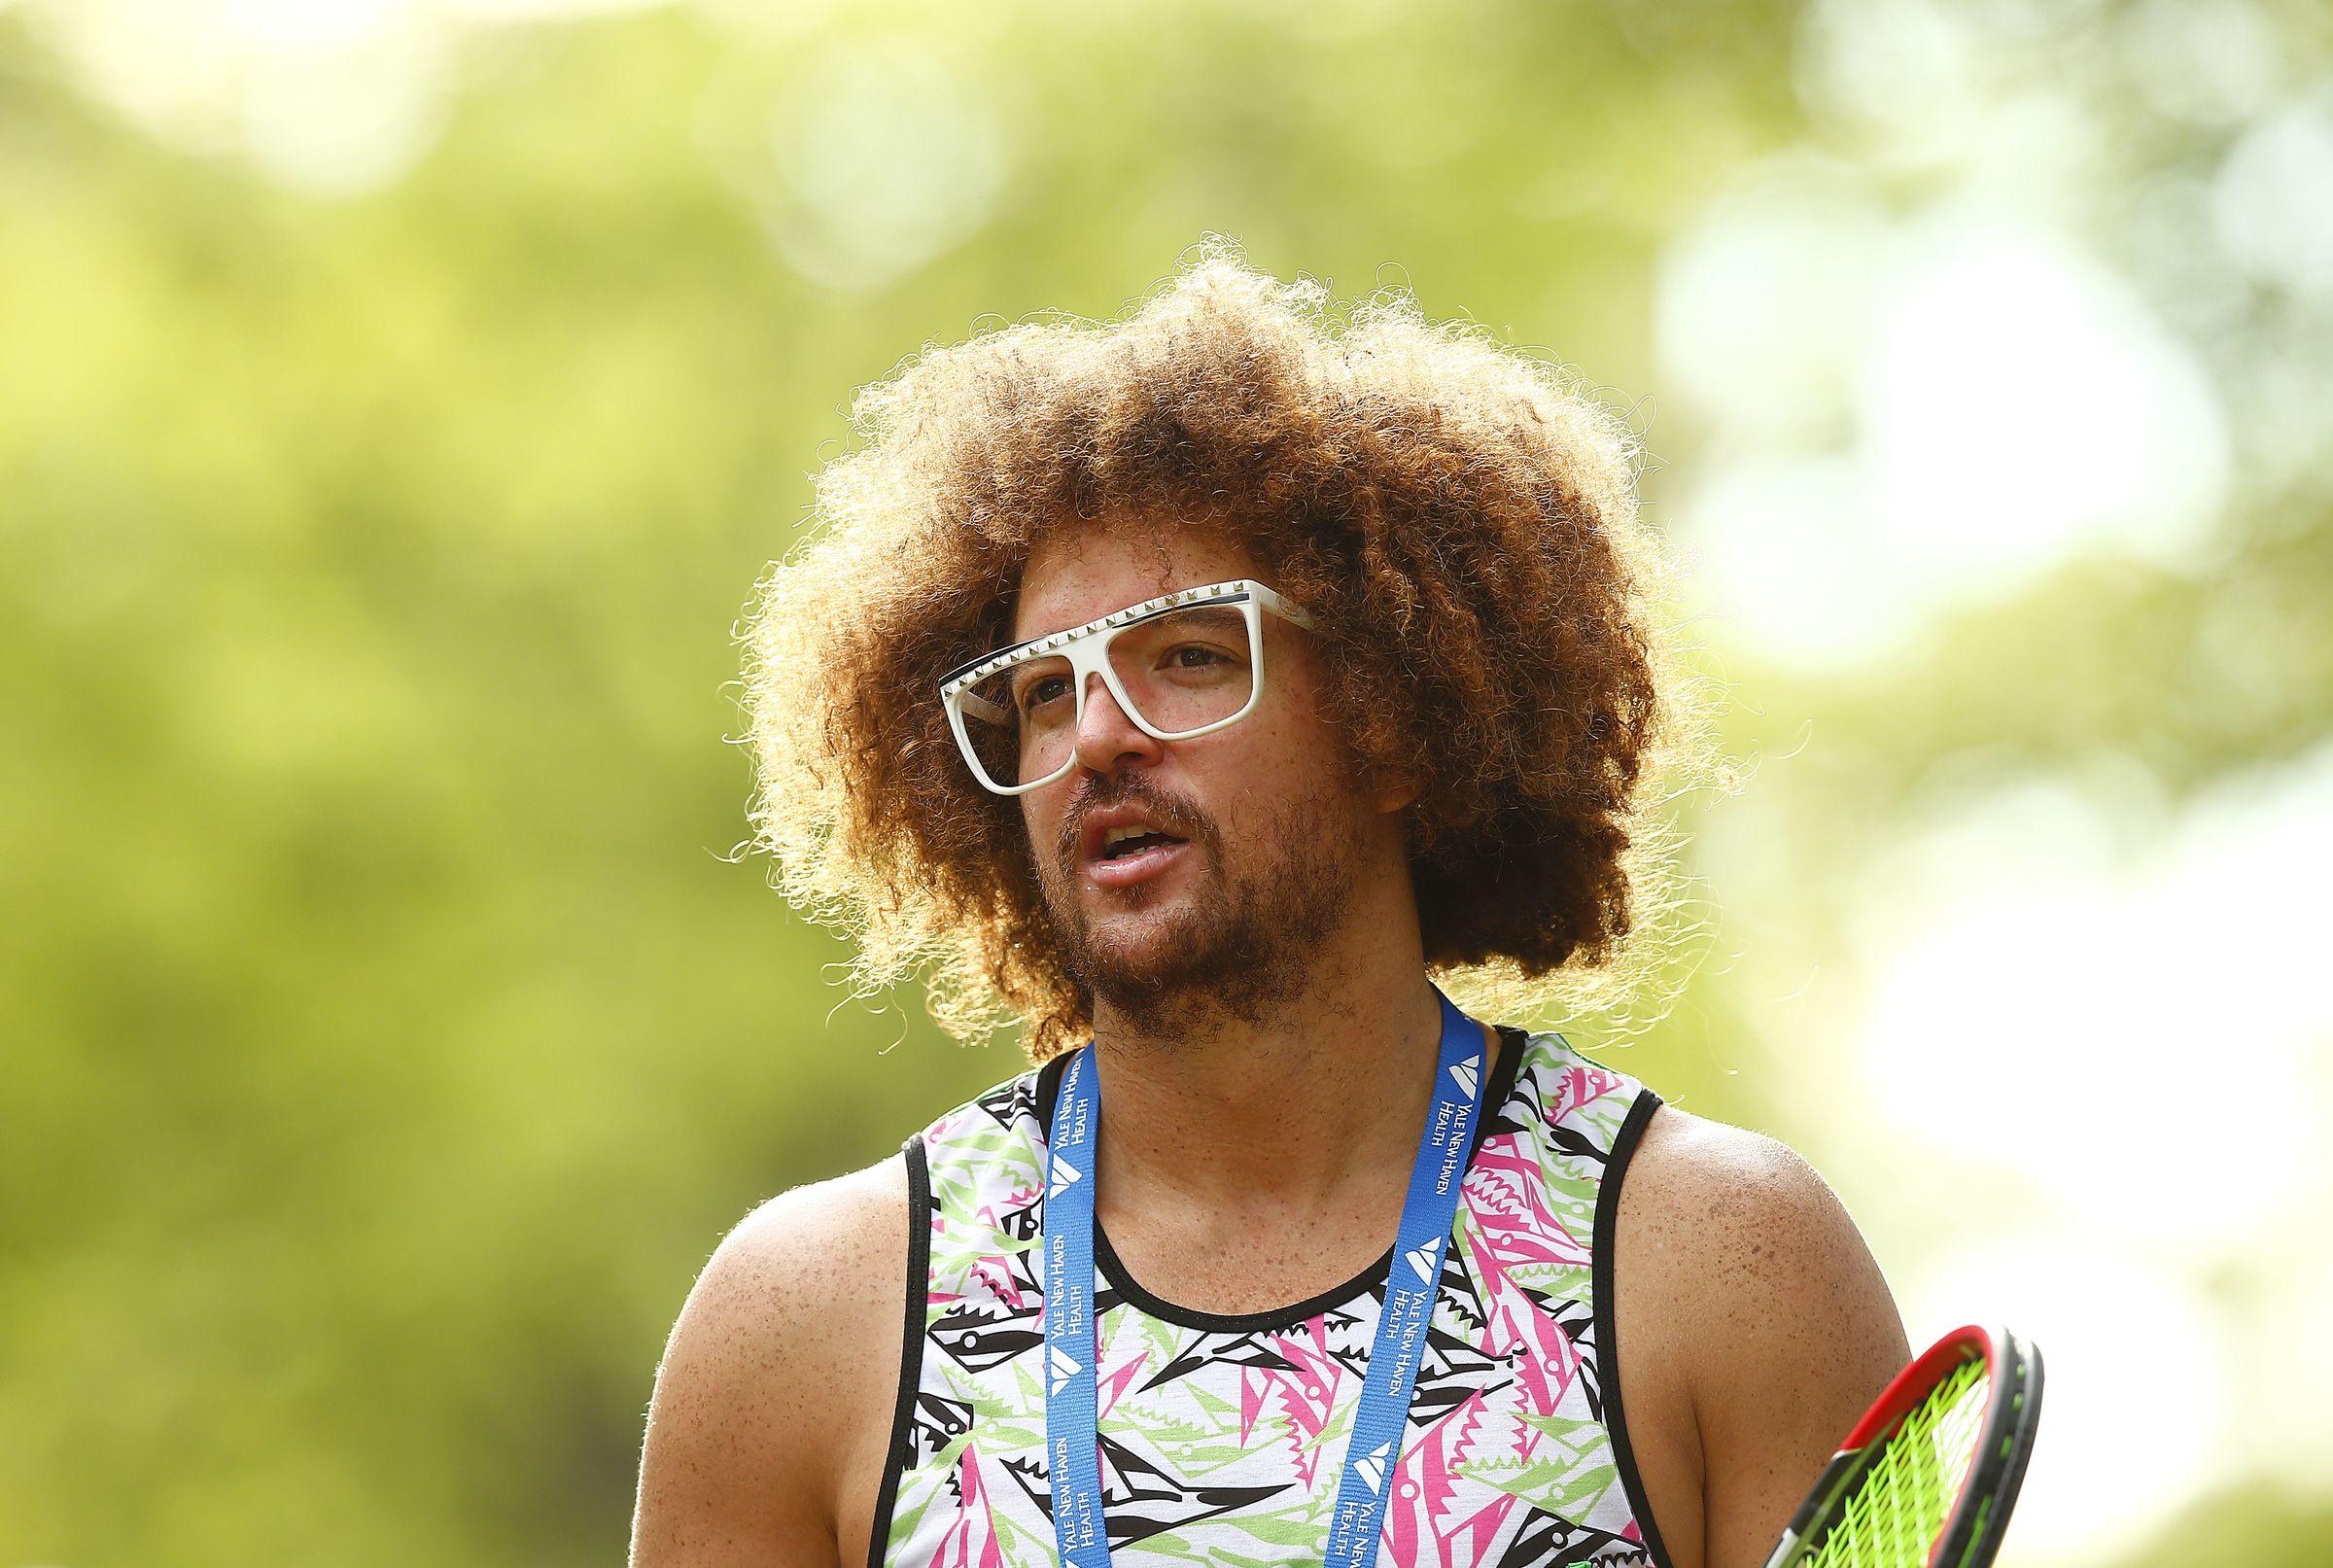 Redfoo Wallpaper Image Photo Picture Background